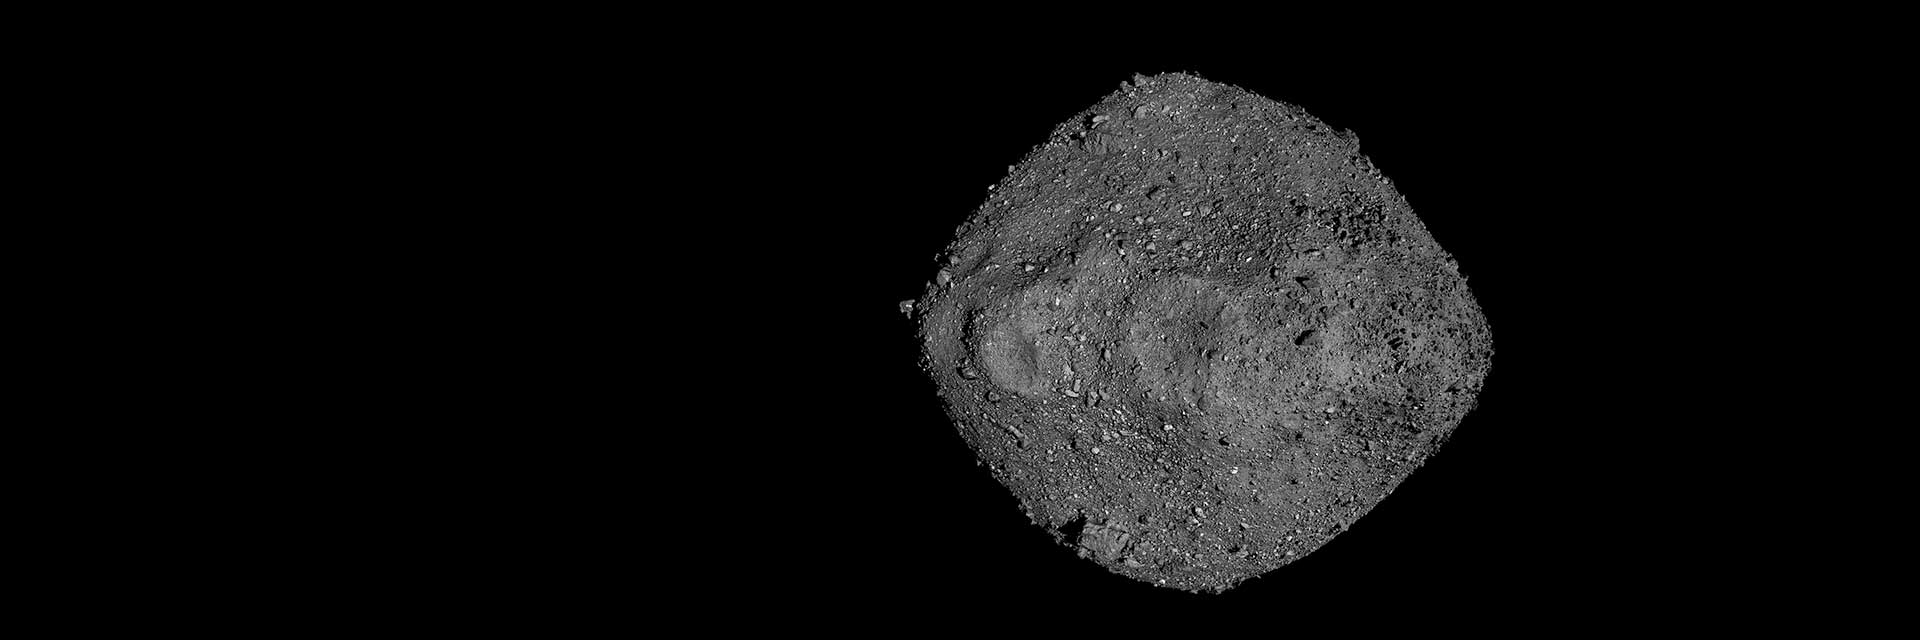 Closeup view of a rocky, diamond-shaped asteroid in space